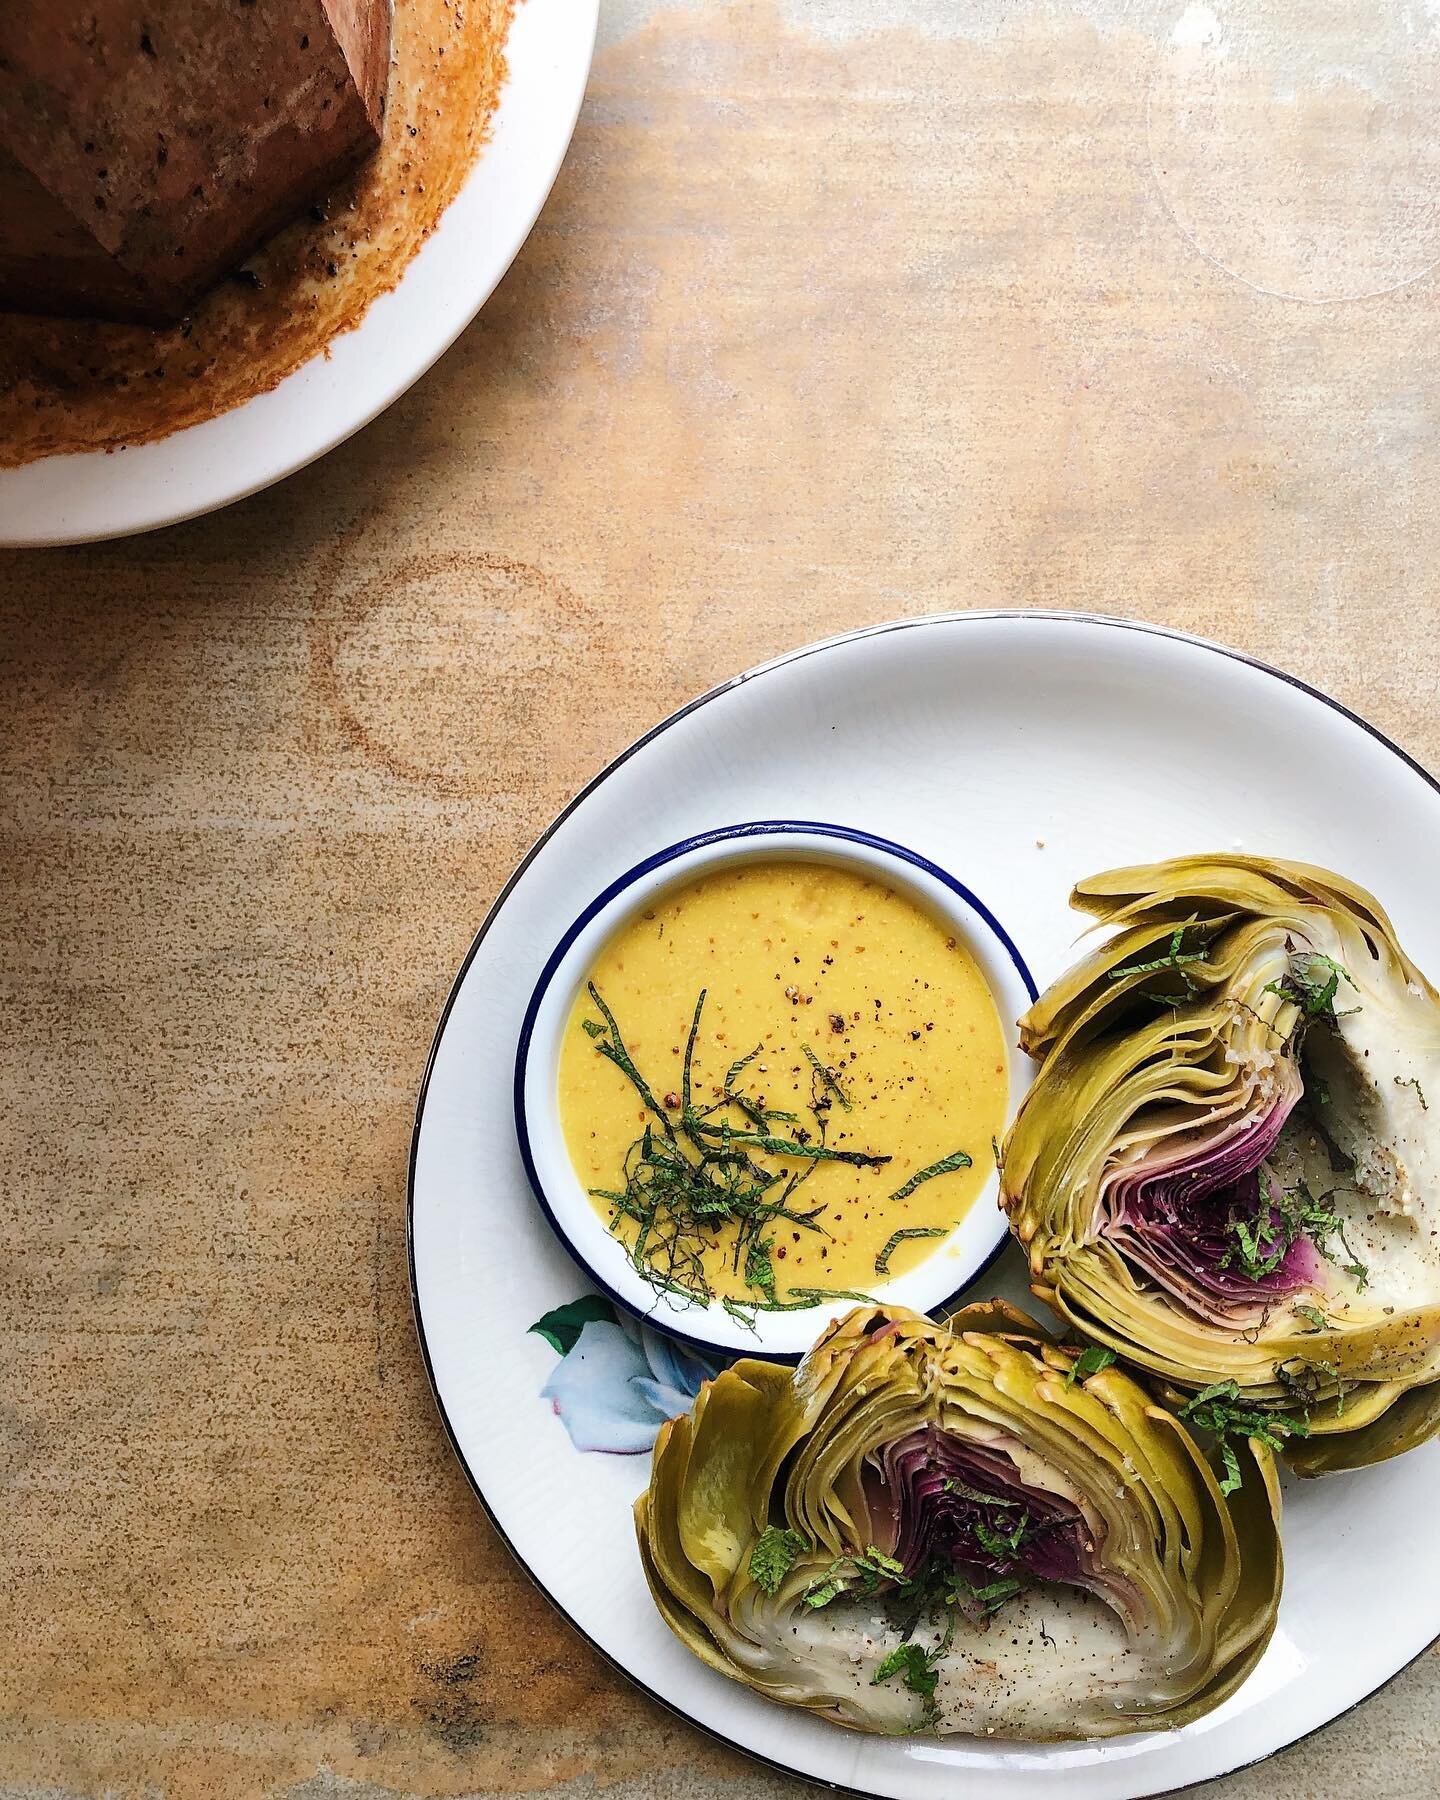 Our globe artichokes have been freshly delivered from Guy and Geetie&rsquo;s Baddaford Farm &hellip; with a nutty, asparagus-y taste these sculptural bulbs are one of our favourite seasonal selections in the kitchen! 

We tend to serve these after br